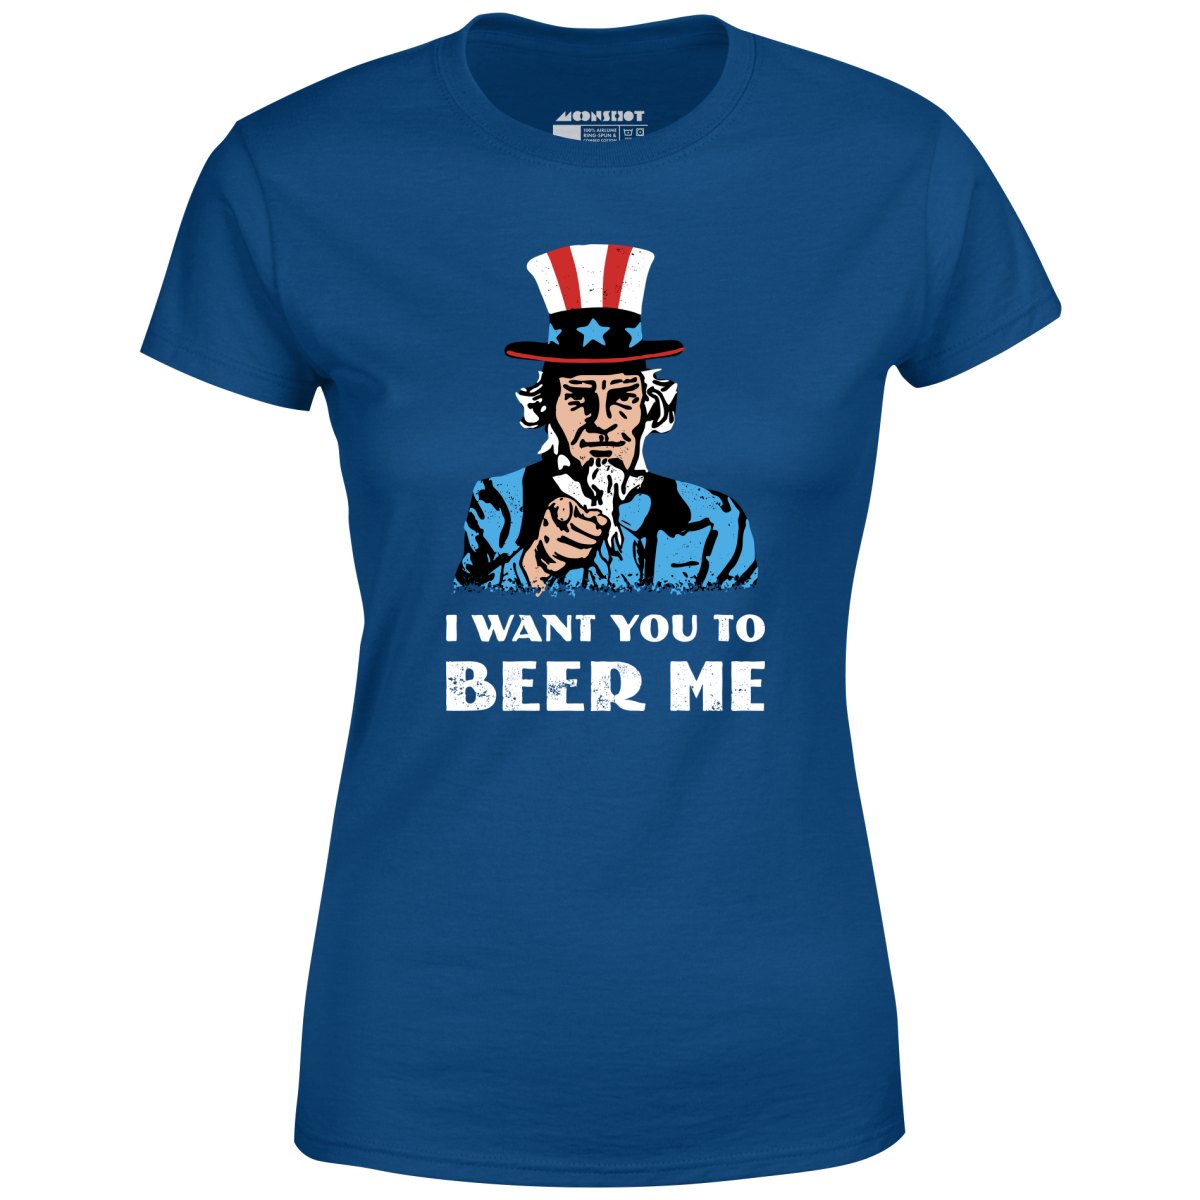 I Want You To Beer Me - Women's T-Shirt